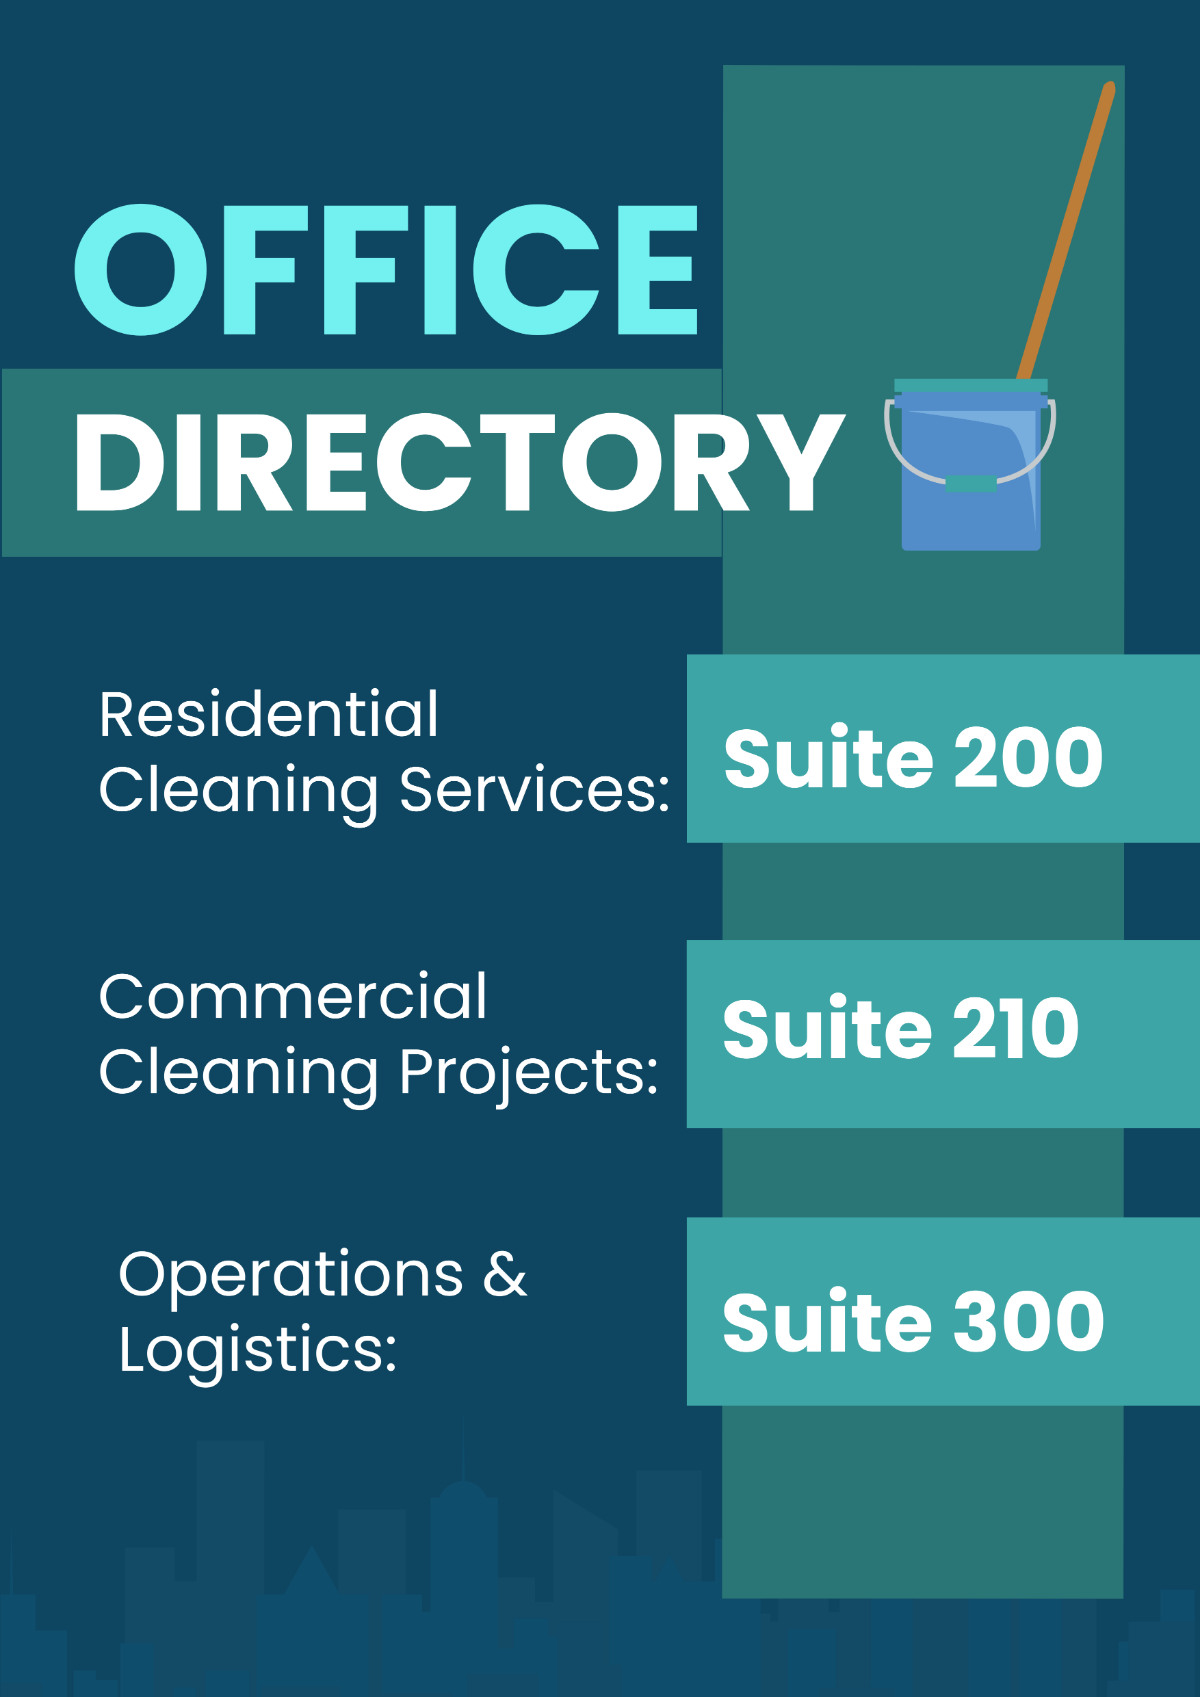 Cleaning Services Office Directory and Departmental Sign Template